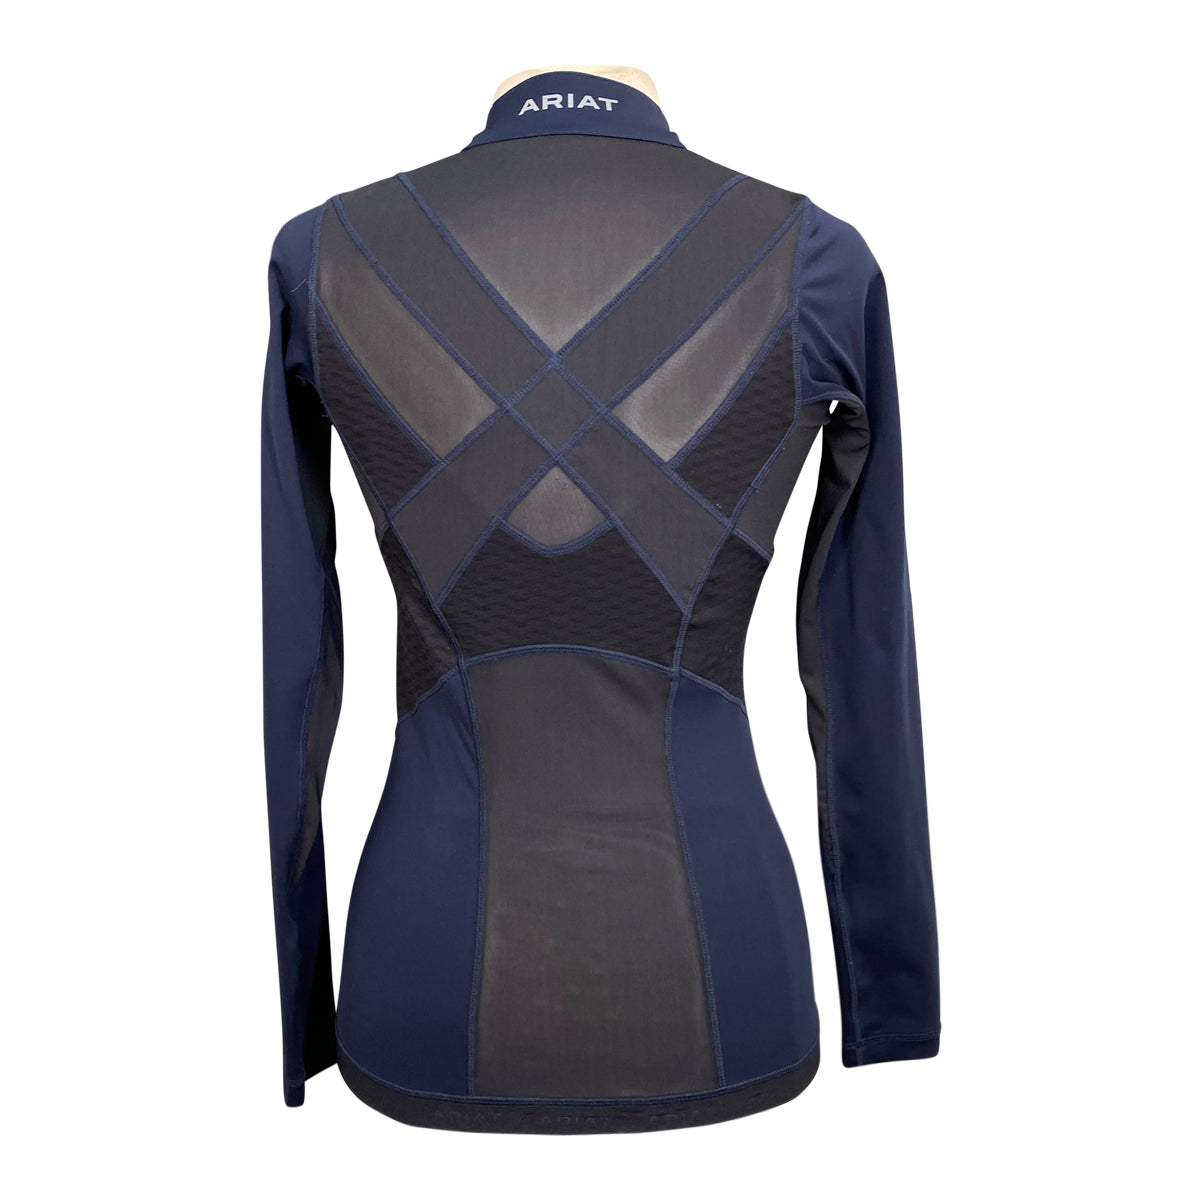 Ariat 'Ascent' Training Top in Navy